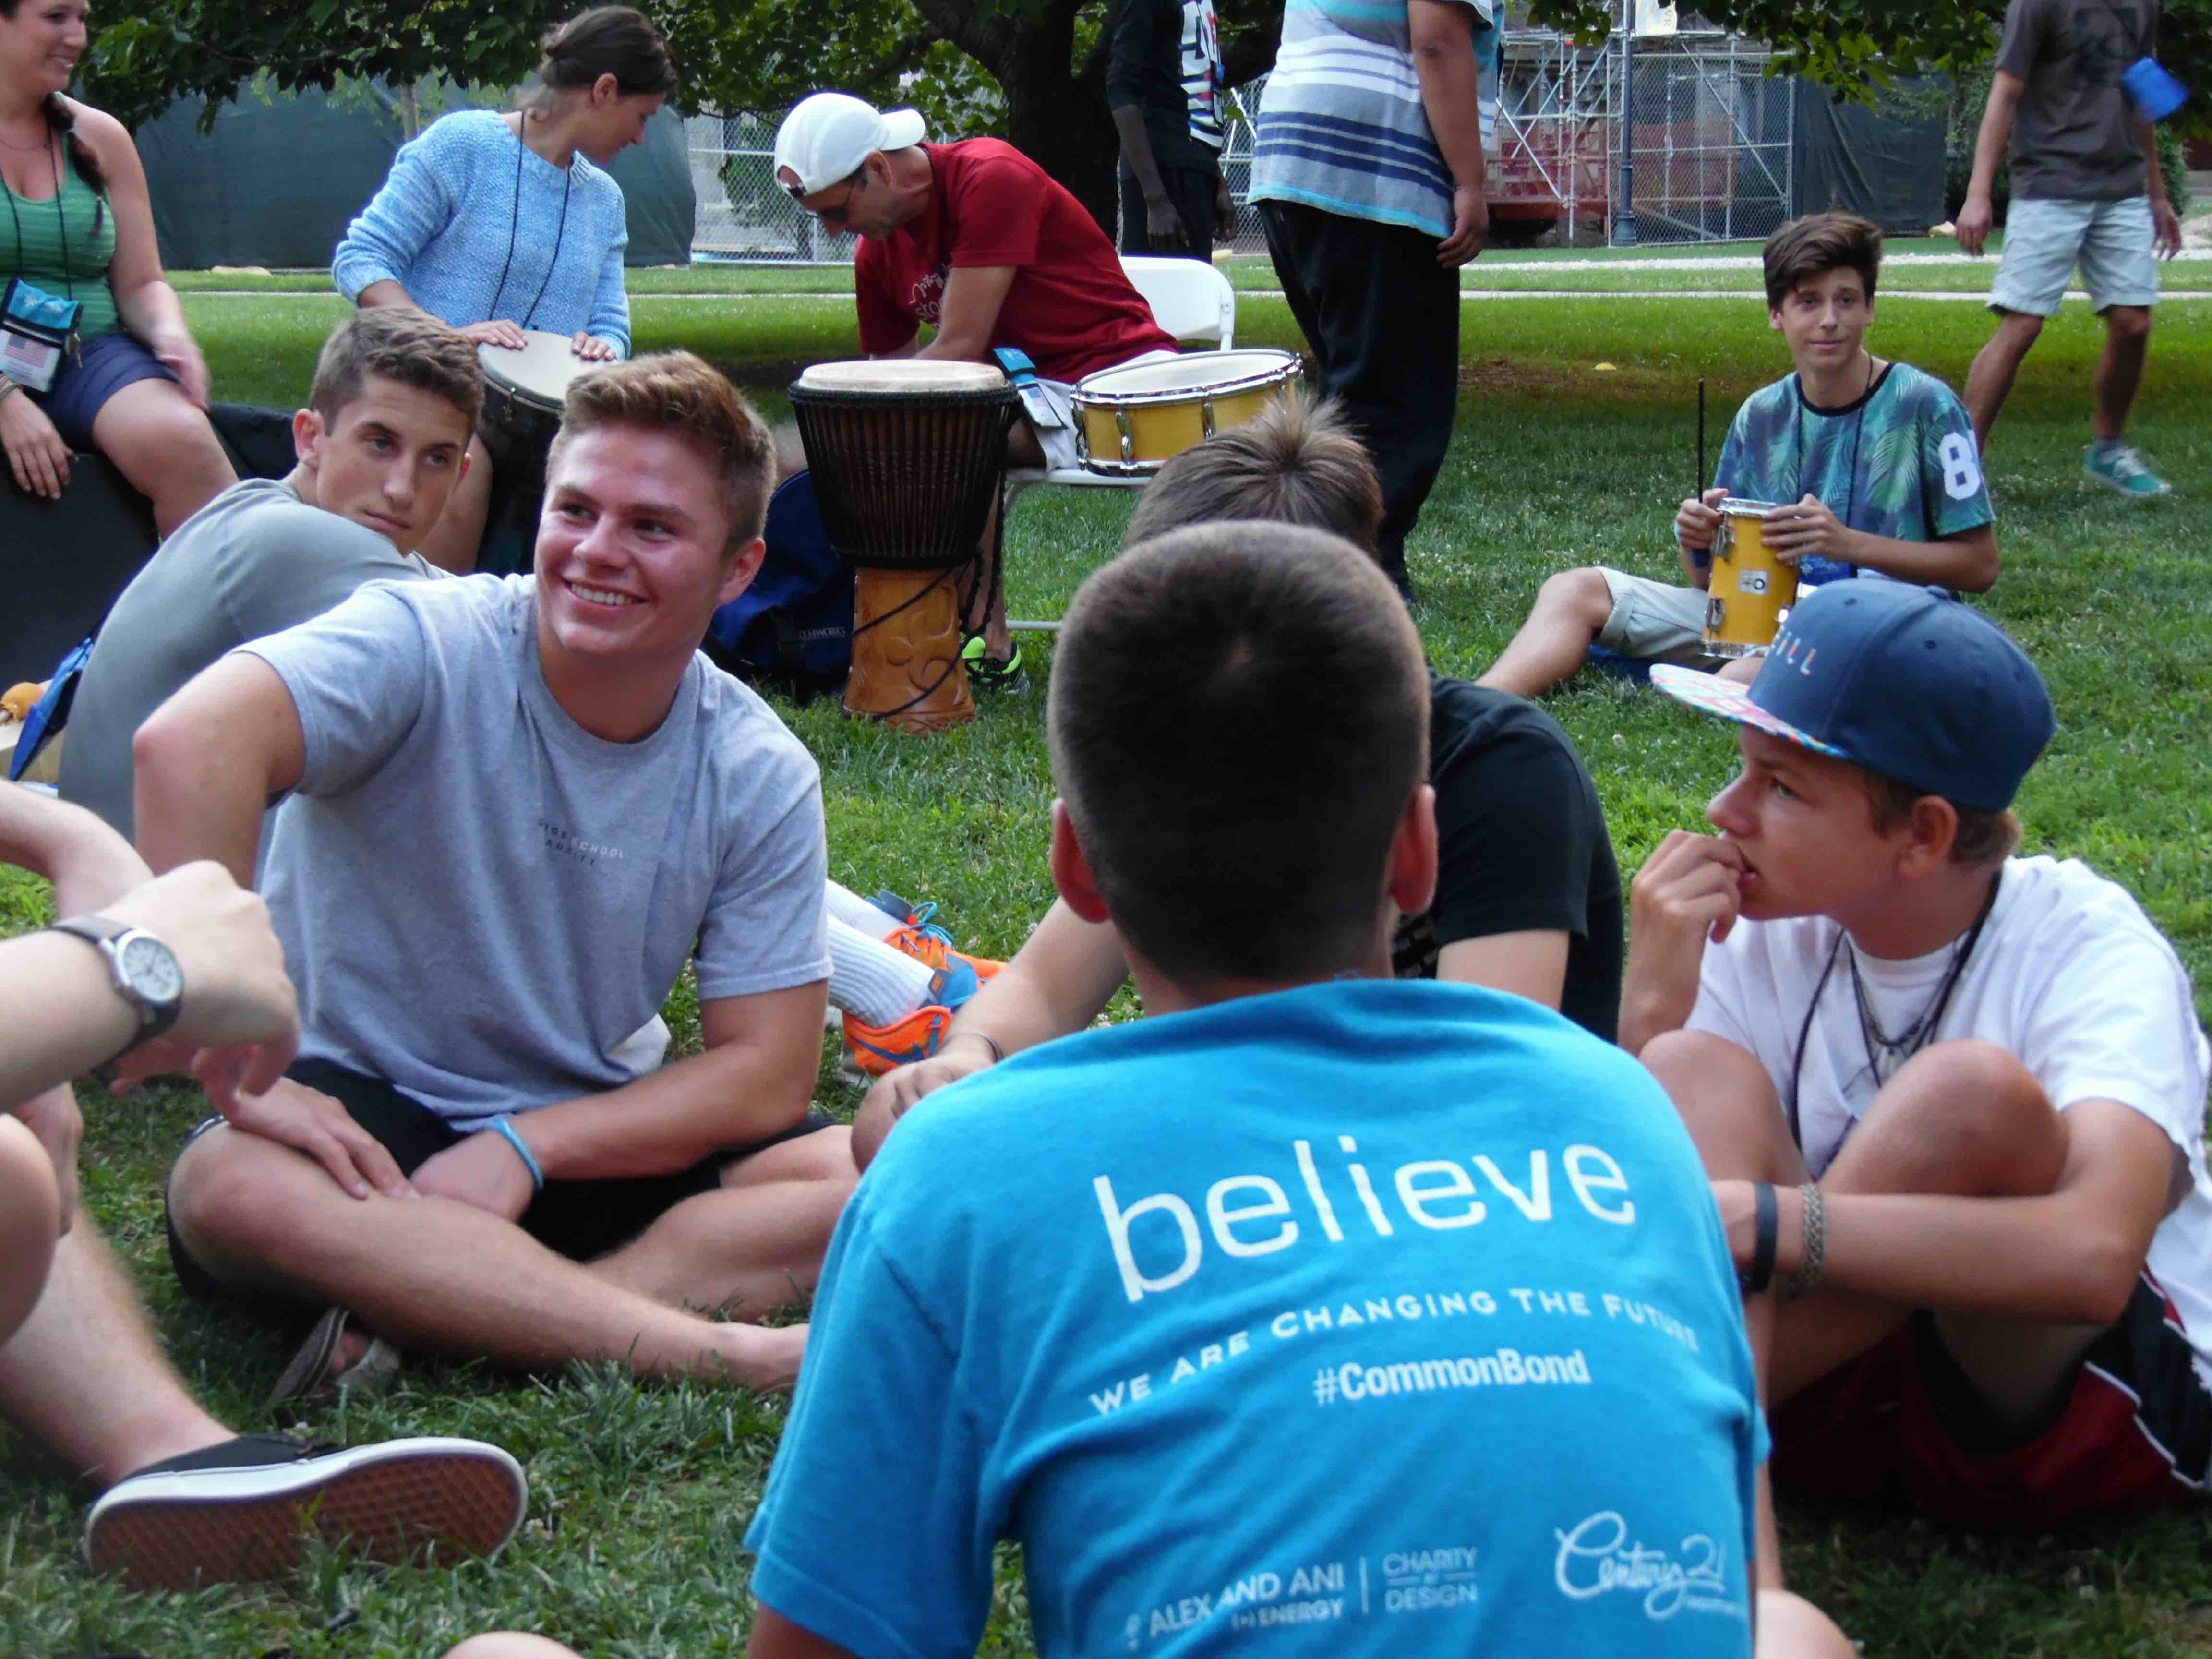 A group of teen boys who have experienced a loss due to terrorism sit together on a grassy area.